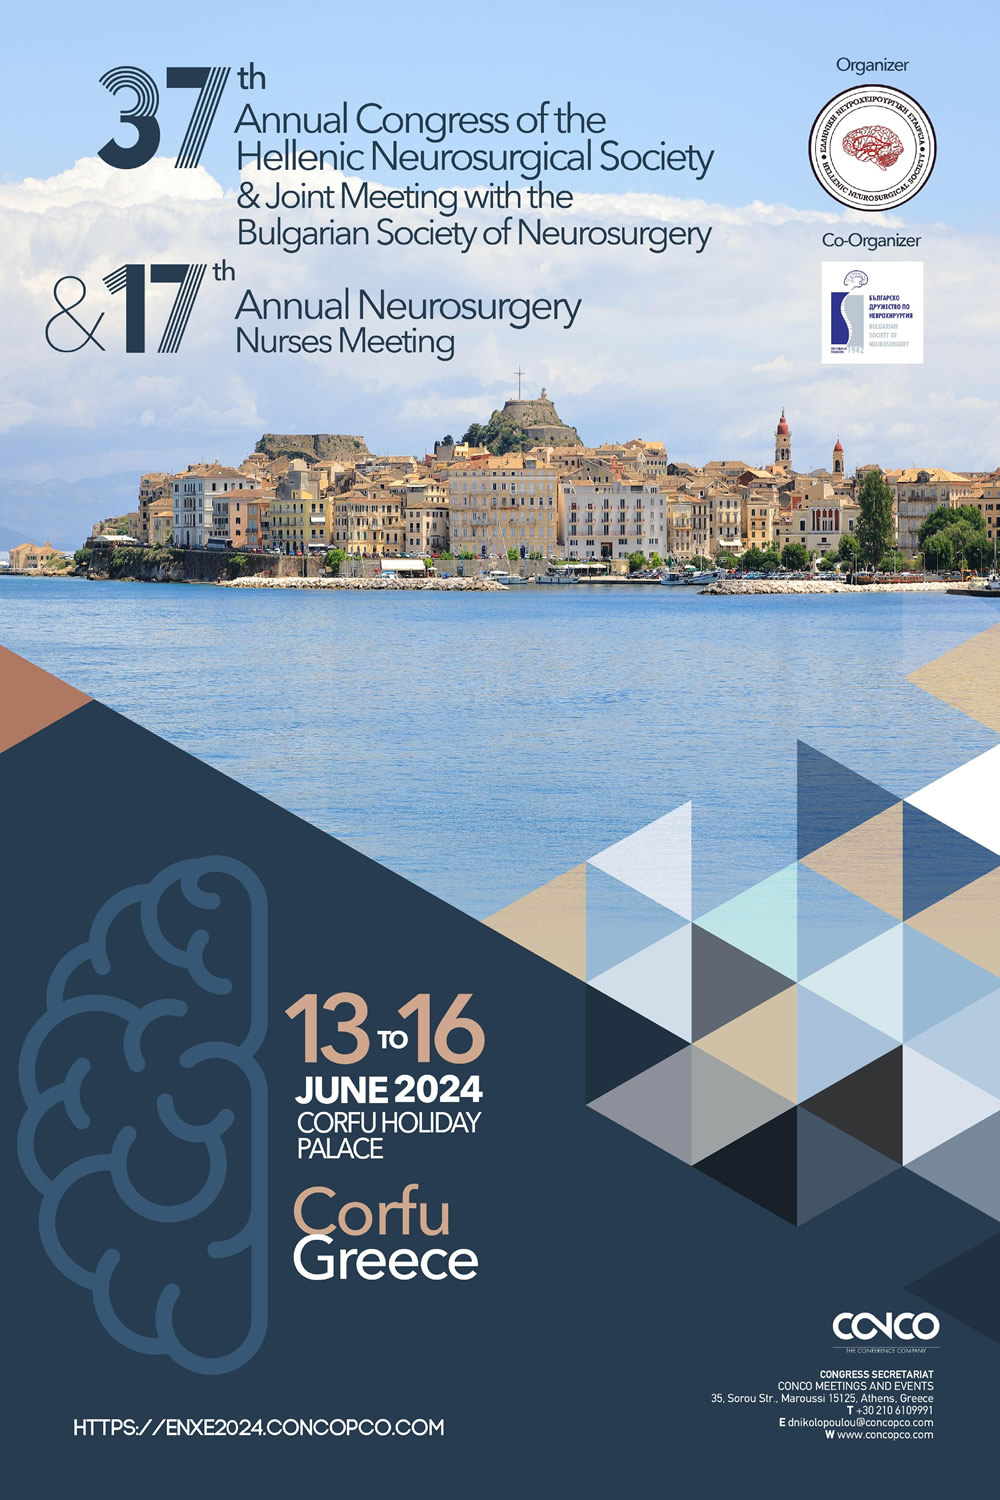 37th Annual Congress of the Hellenic Neurosurgical Society